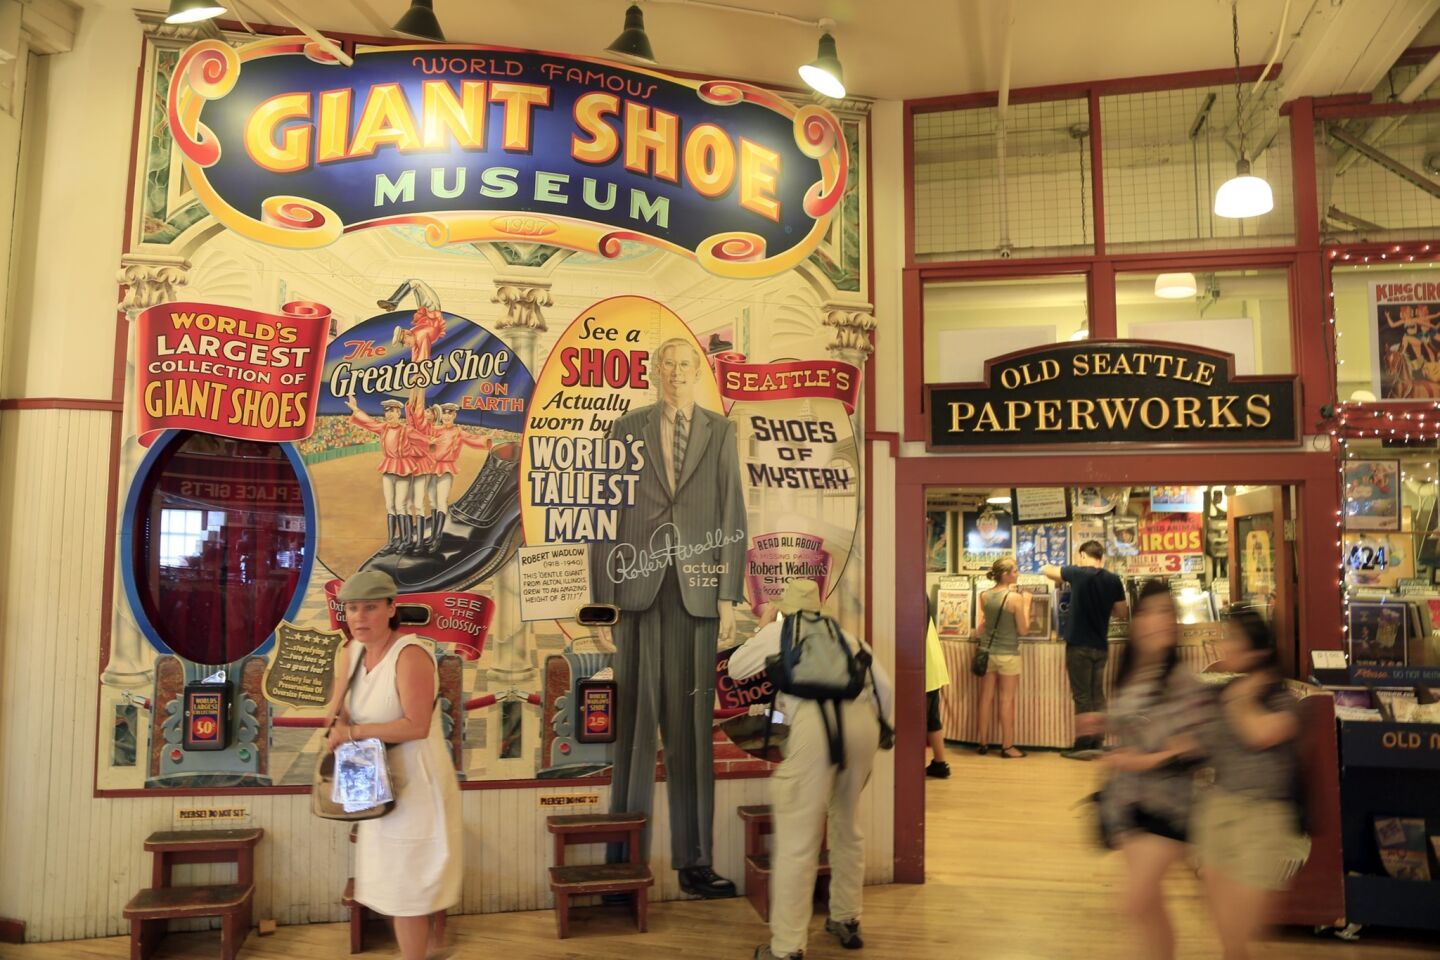 There is more to the historic market than produce and fish. For example: the Giant Shoe Museum, next to the Old Seattle Paperworks on the lower level.